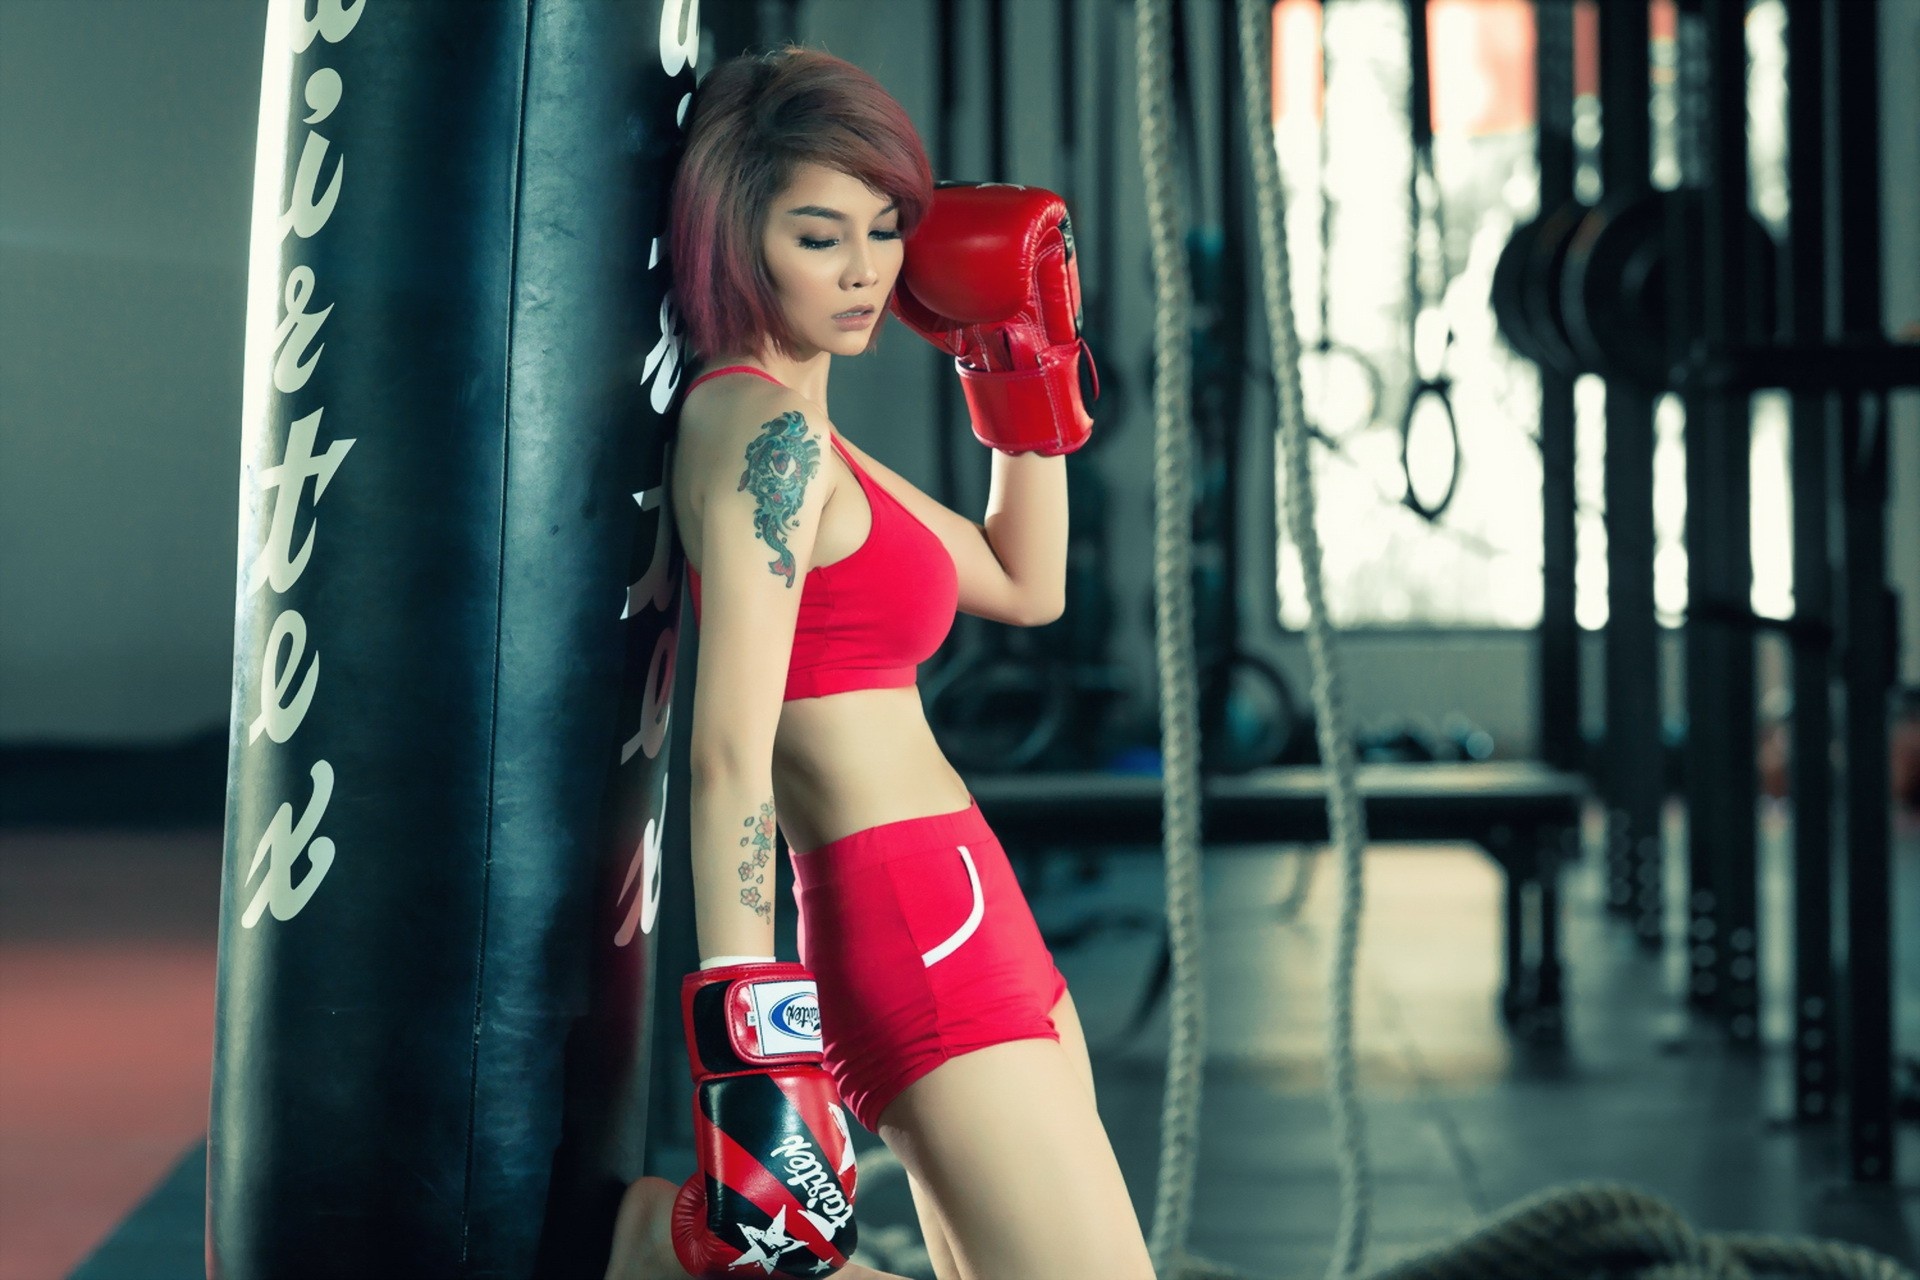 Combat Sports: Girl Boxing, Sports Apparel and Equipment, Women Boxing, Sports Gym. 1920x1280 HD Background.